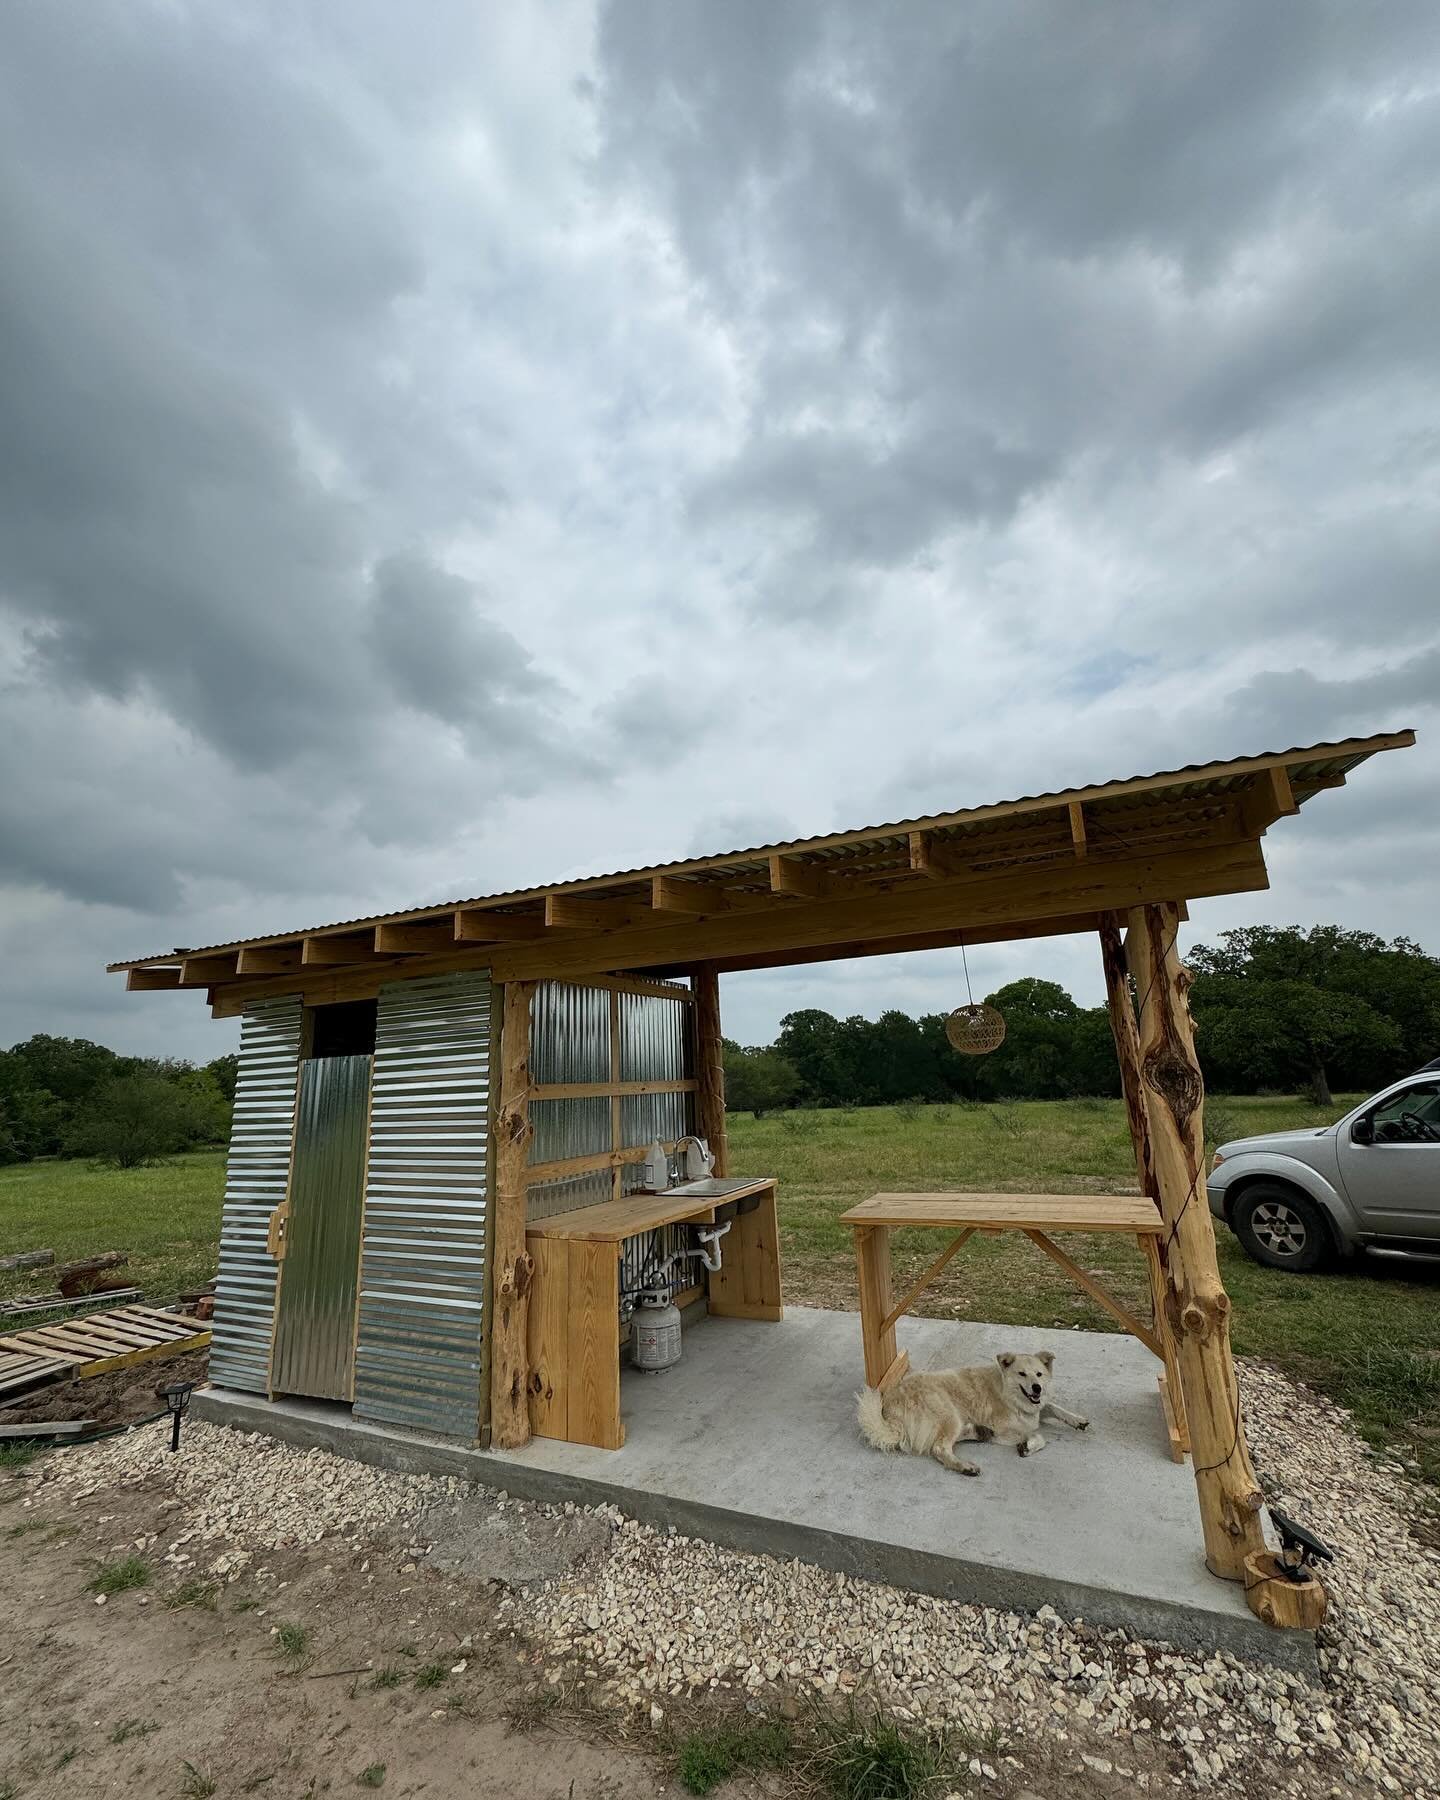 We just have to keep geekin&rsquo; on our super beautiful bathhouse! 😍😍😍😍

Come stay with us!

#starloveranch #farmanimalsanctuary #vegananimalsanctuary #giddings #dimebox #texas #austin #veganfortheanimals #vegansoftexas #texasvegans #texasvegan